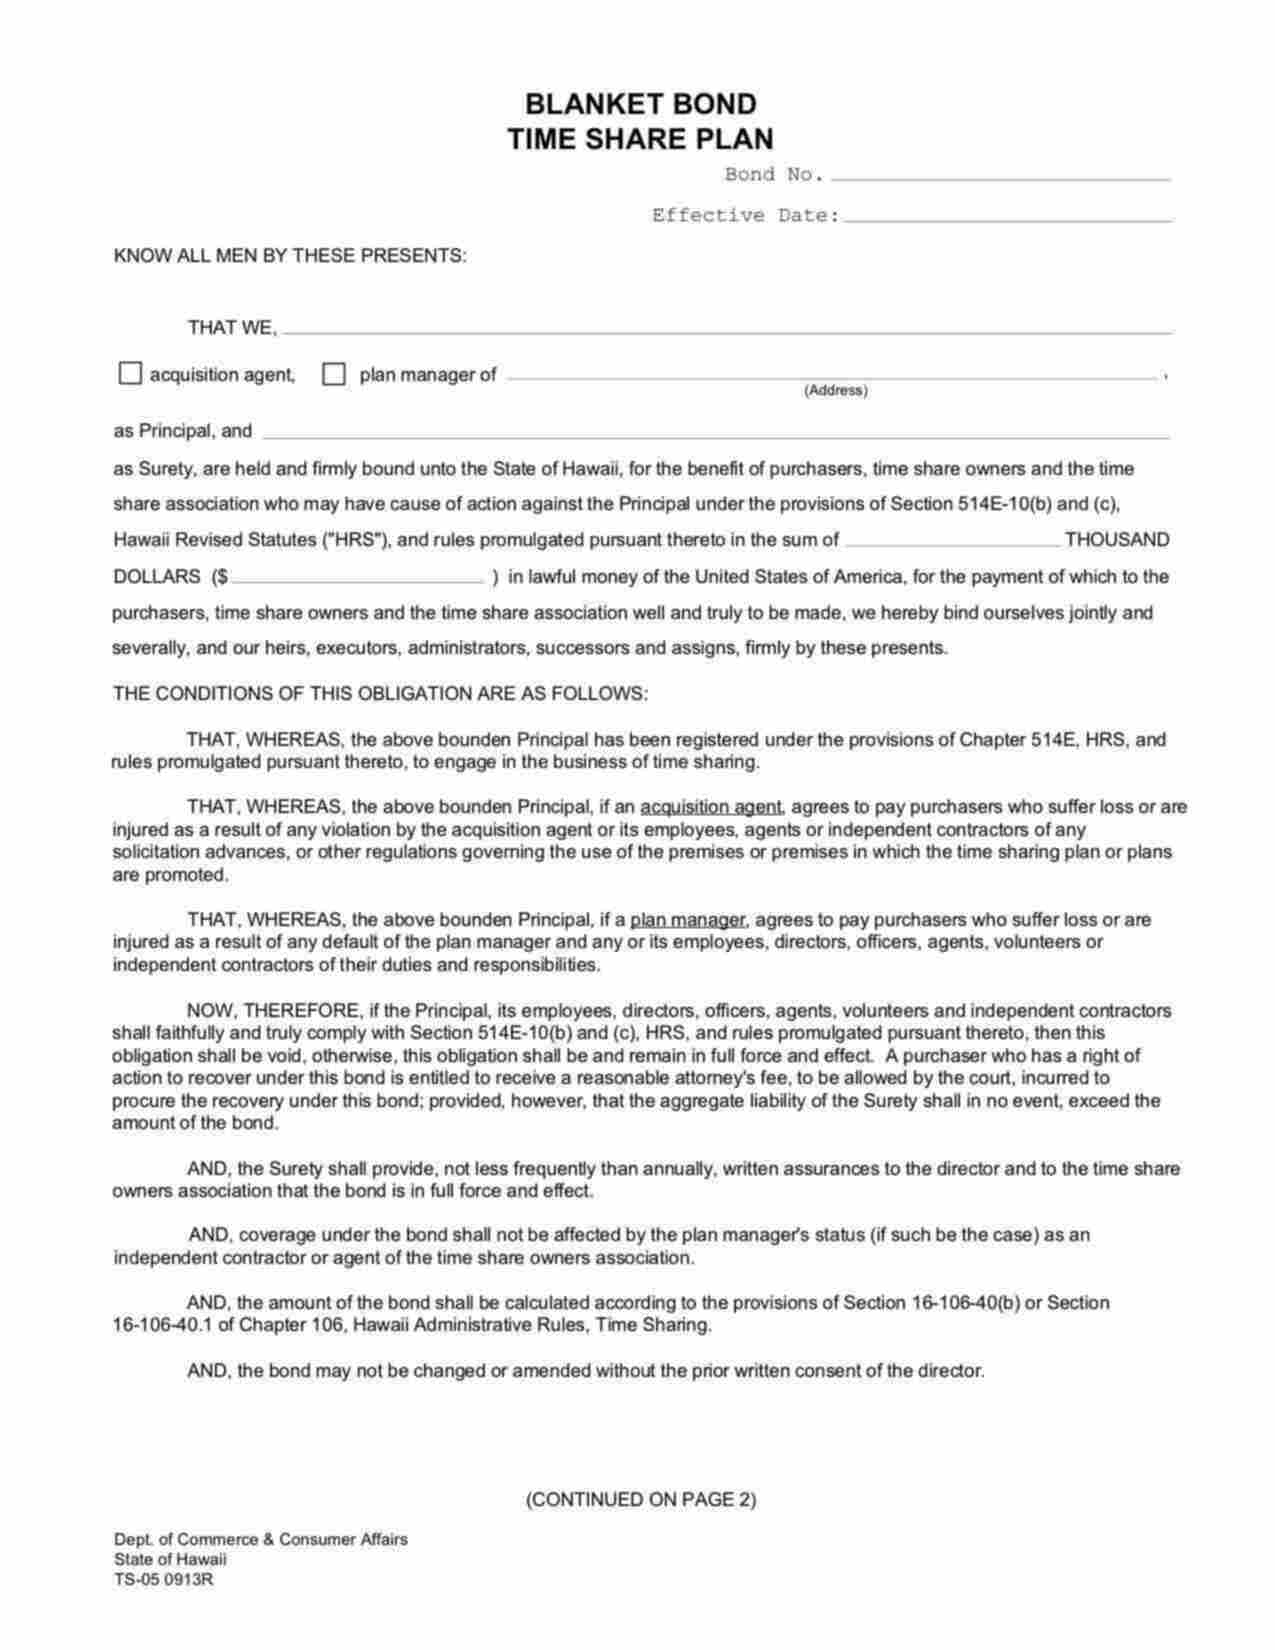 Hawaii Time Share Acquisition Agent Bond Form